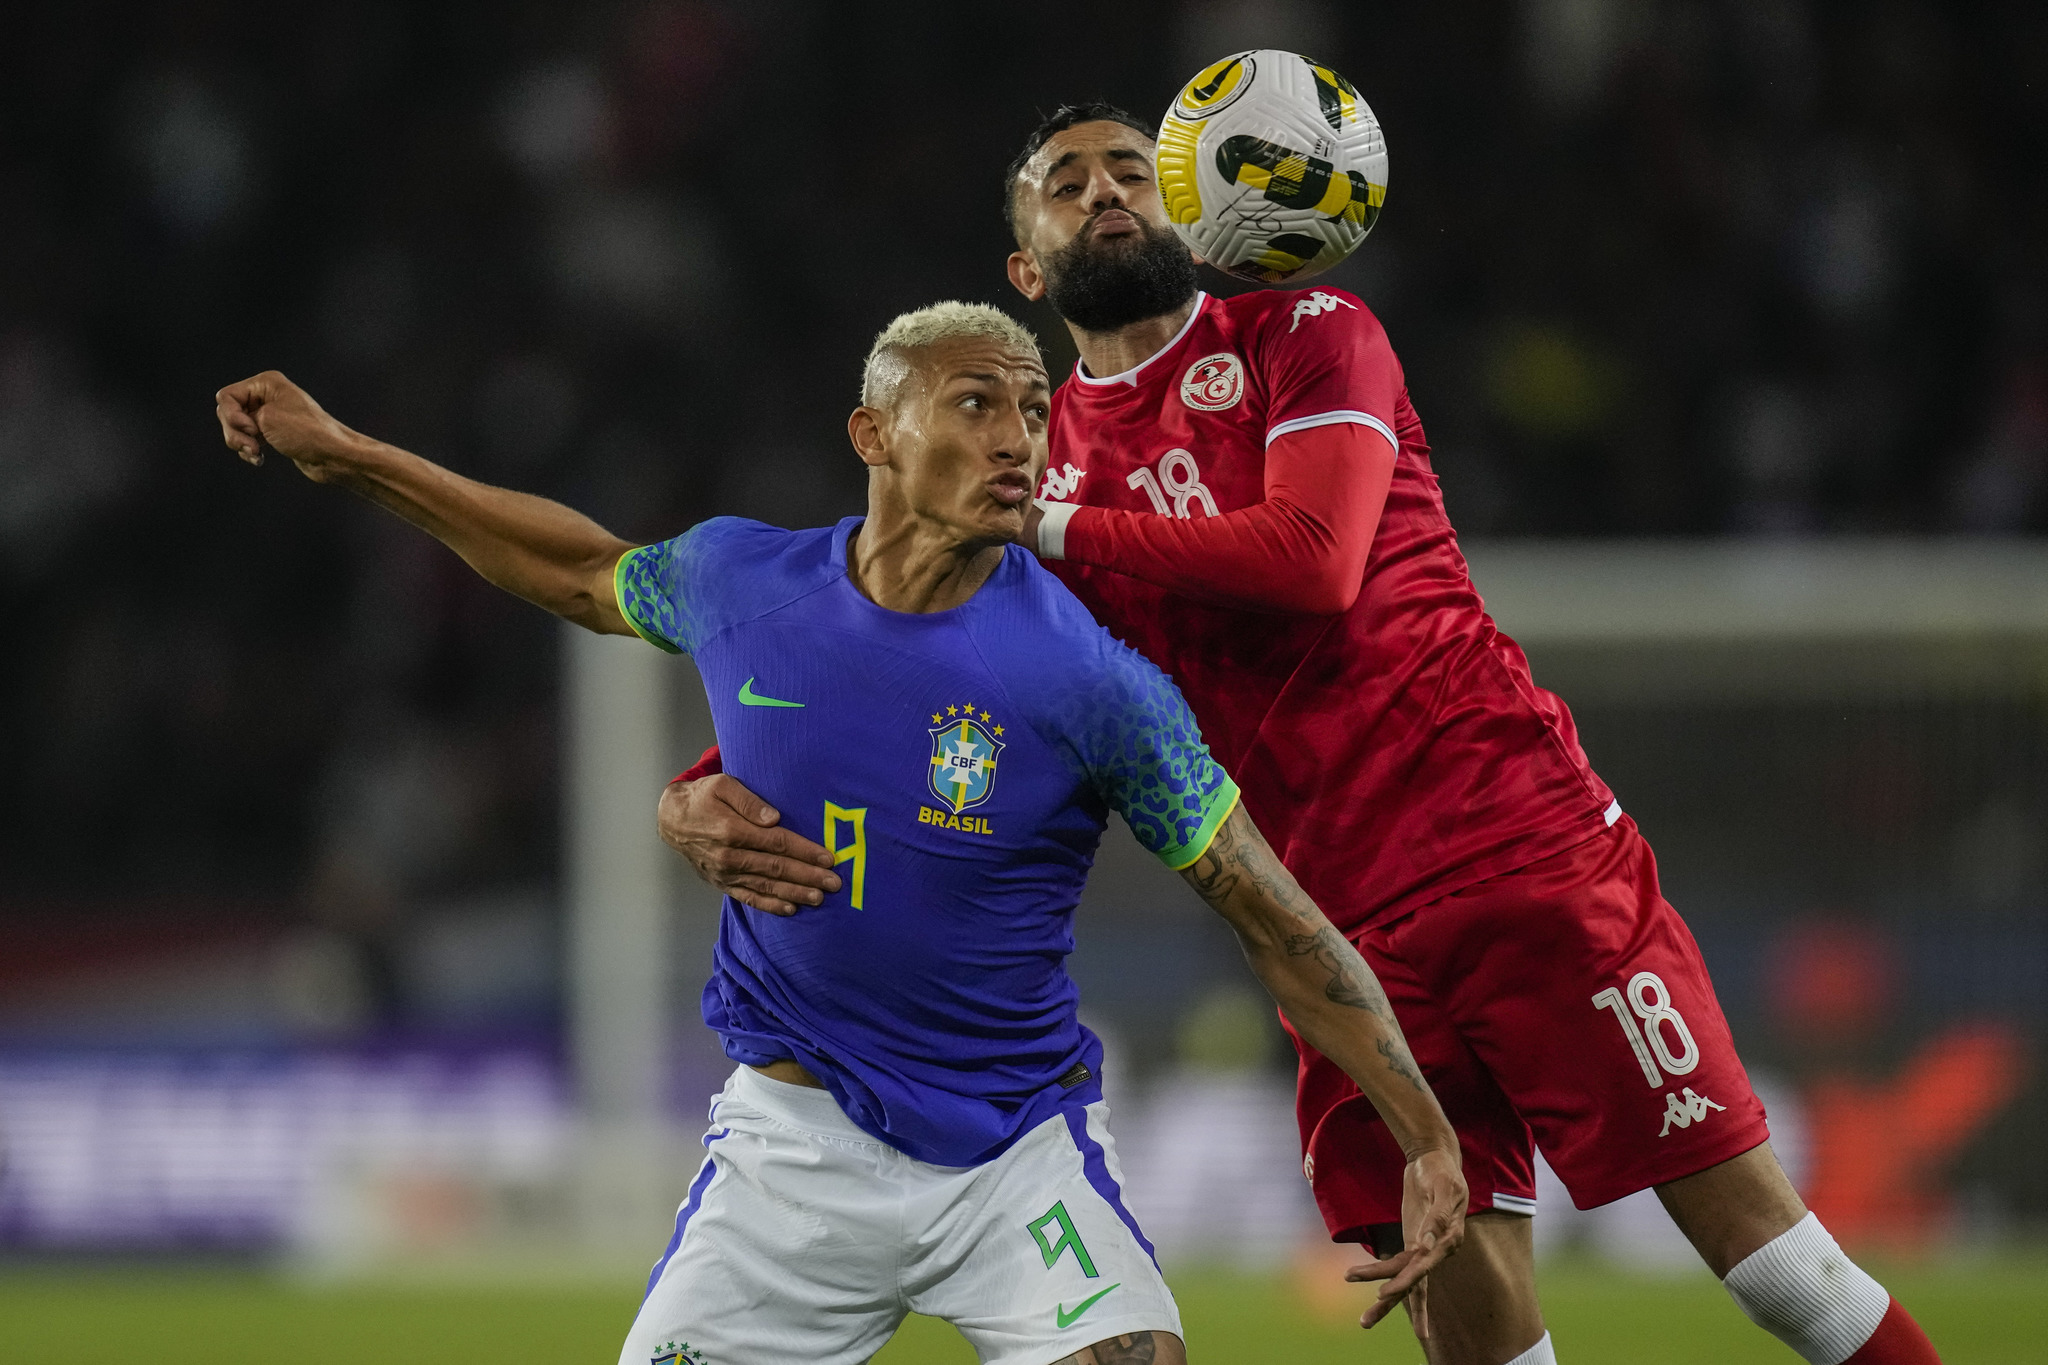 Tunisias Ghaylen Chaaleli, right, duels for the ball with Brazils Richarlison 